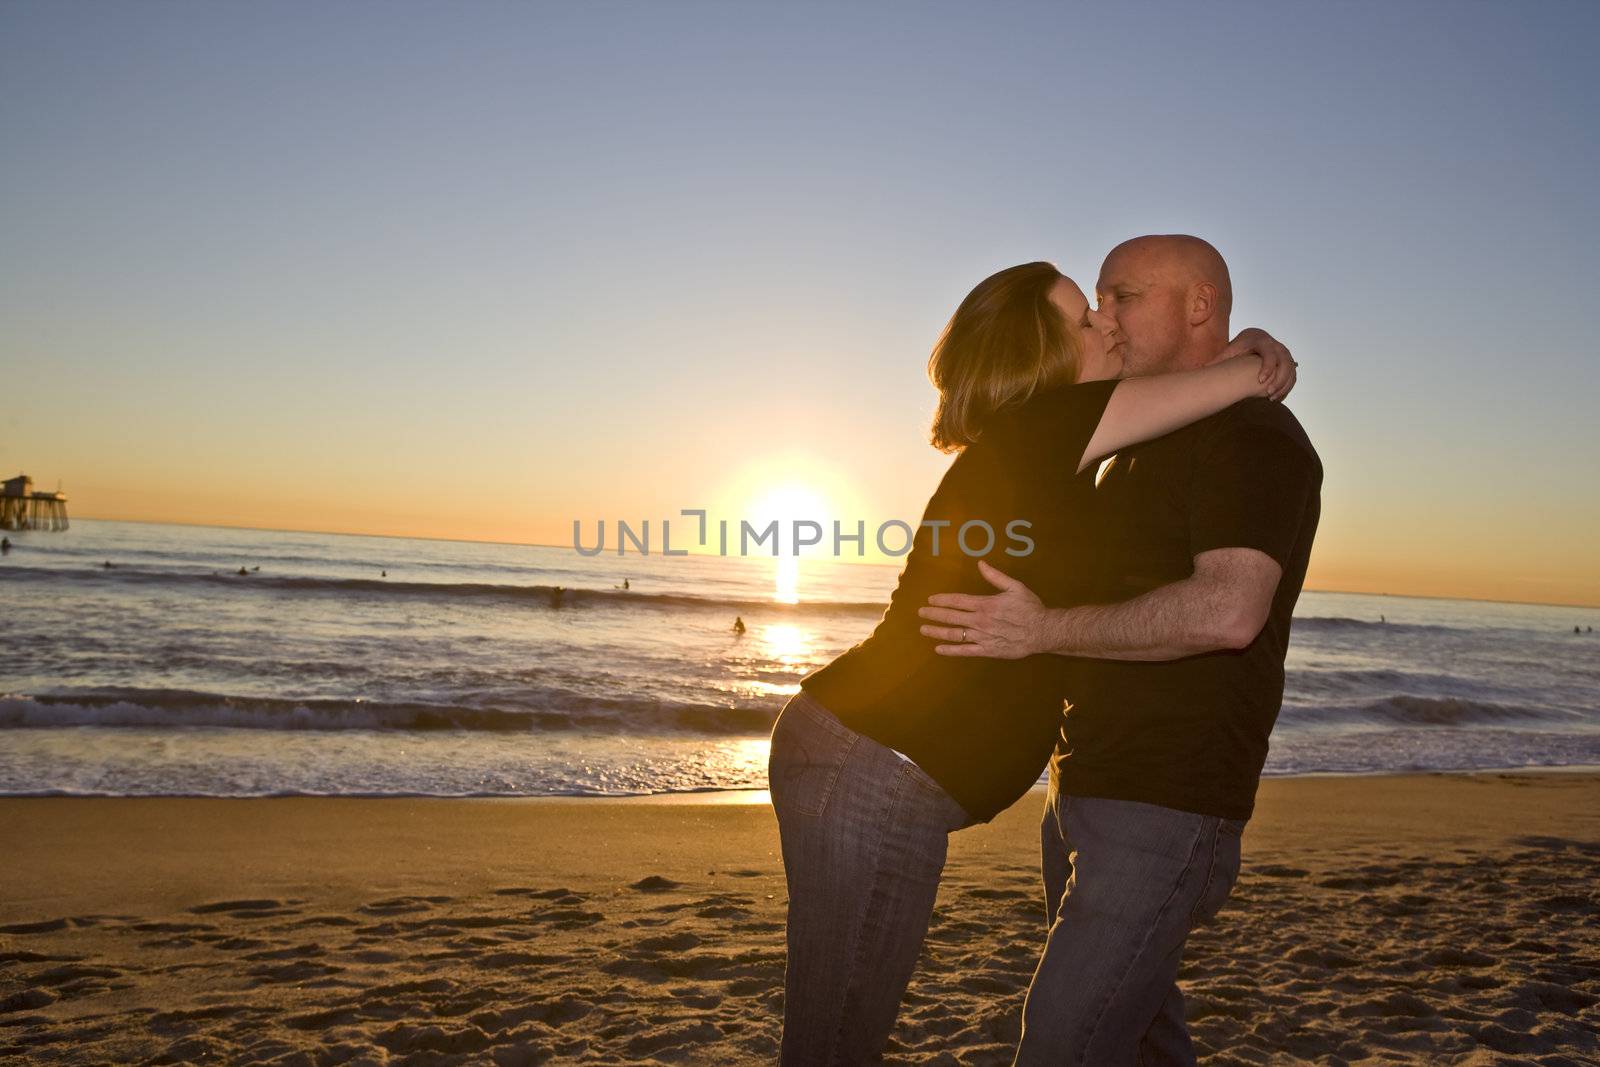 Young Pregnant Couple on the Beach at Sunset